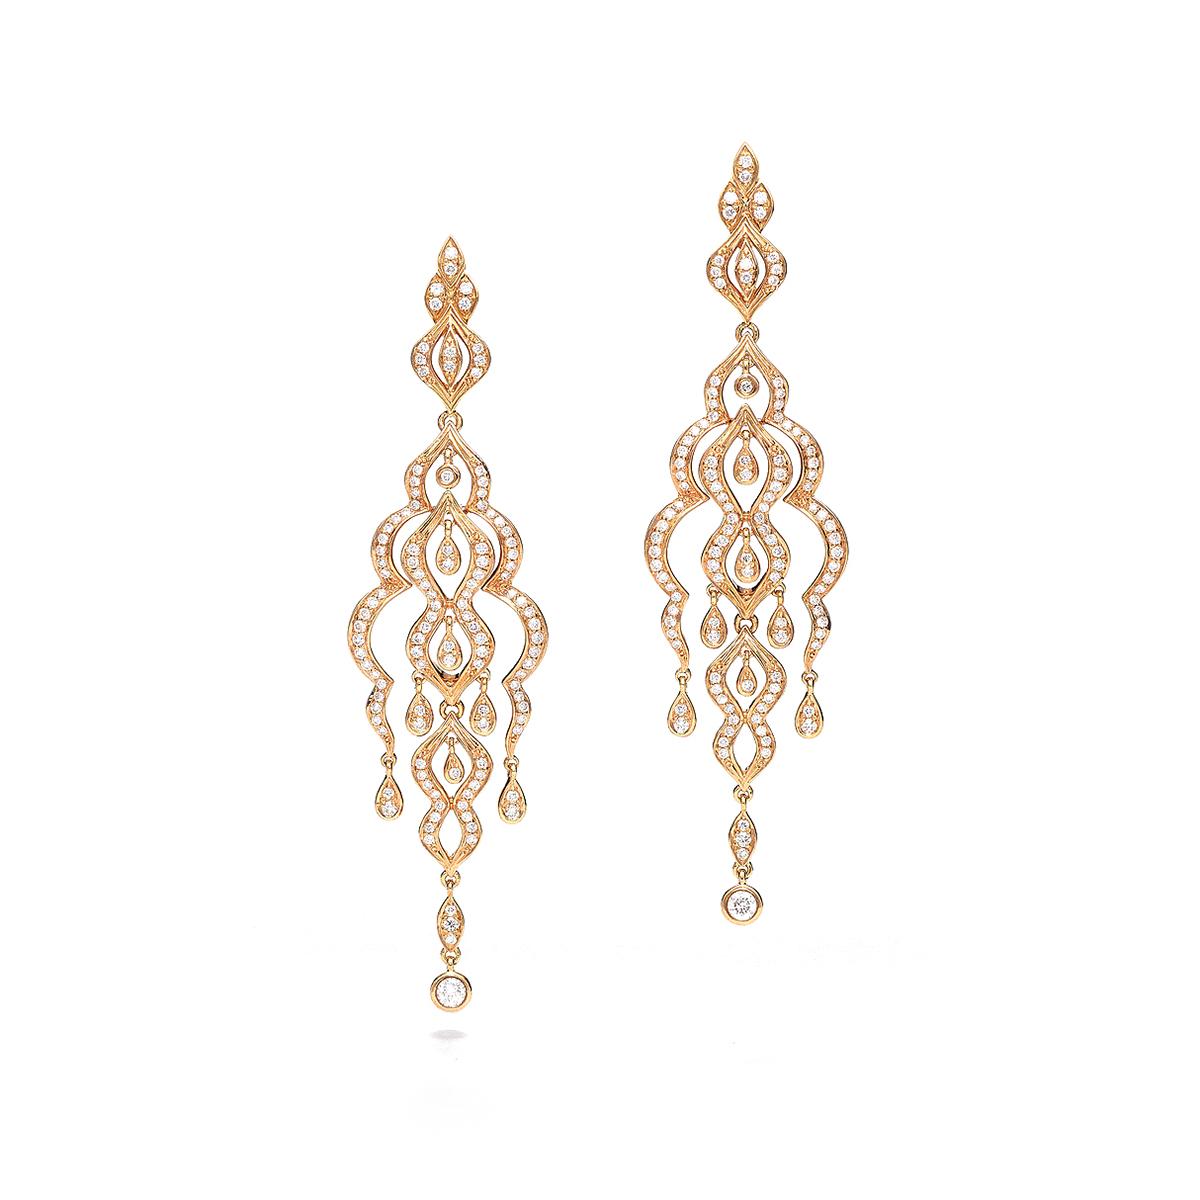 Earrings in 18kt pink gold set with 236 diamonds 1.69 cts